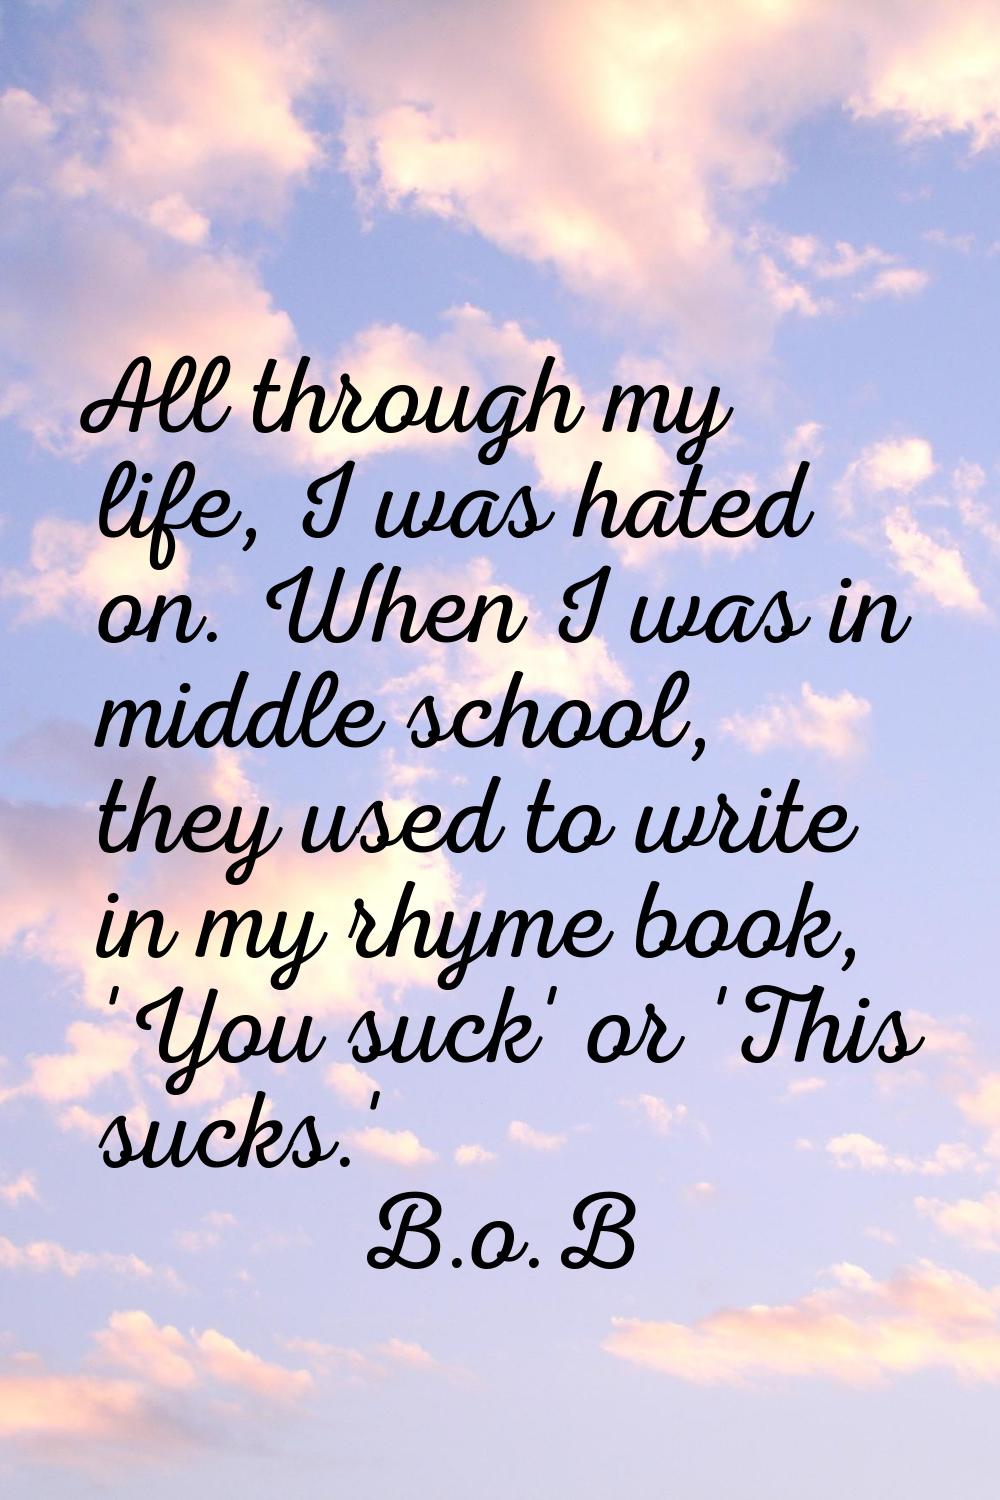 All through my life, I was hated on. When I was in middle school, they used to write in my rhyme bo